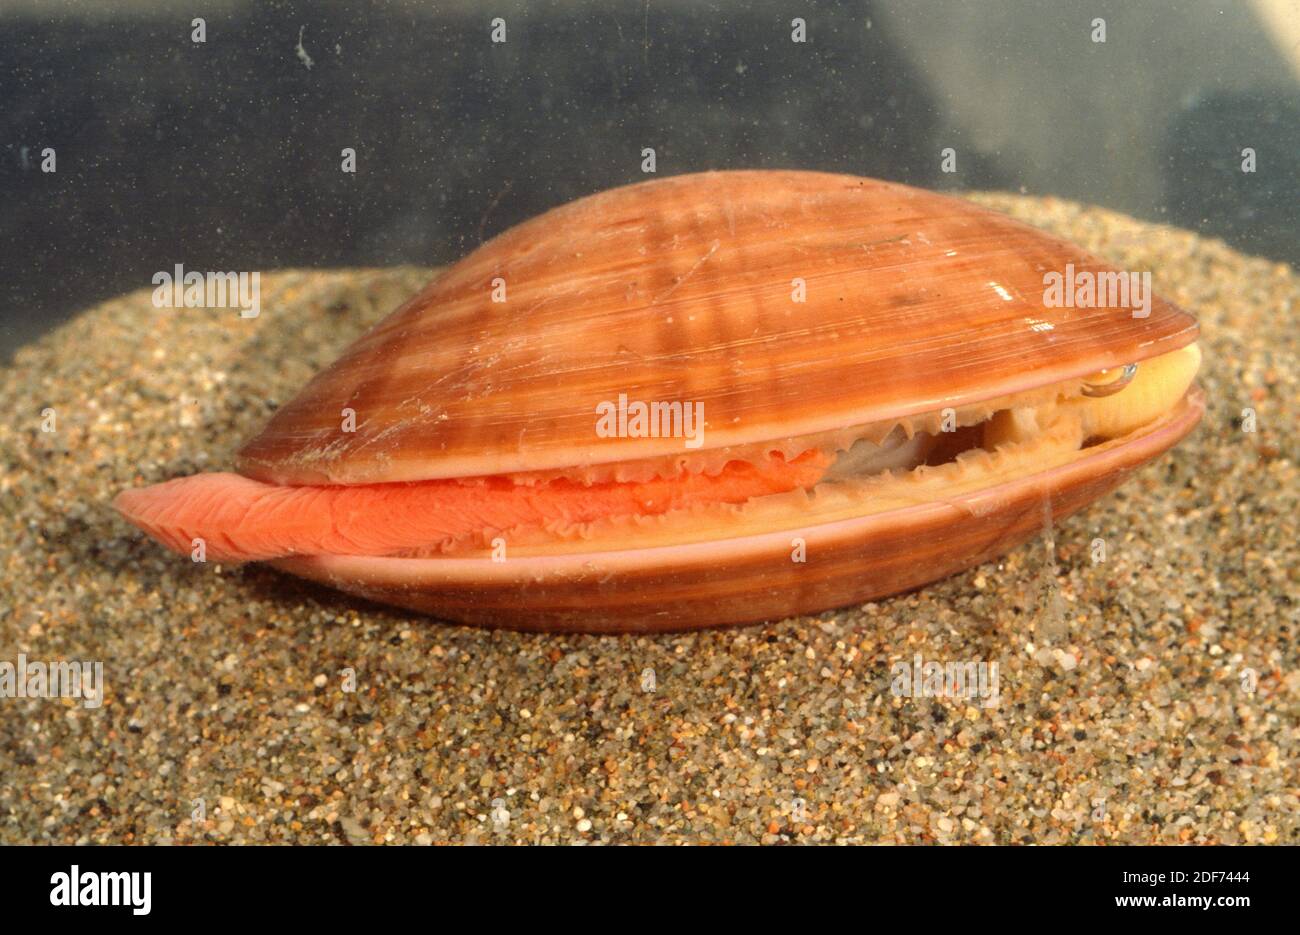 Smooth clam (Callista chione) is a marine mollusk. Stock Photo